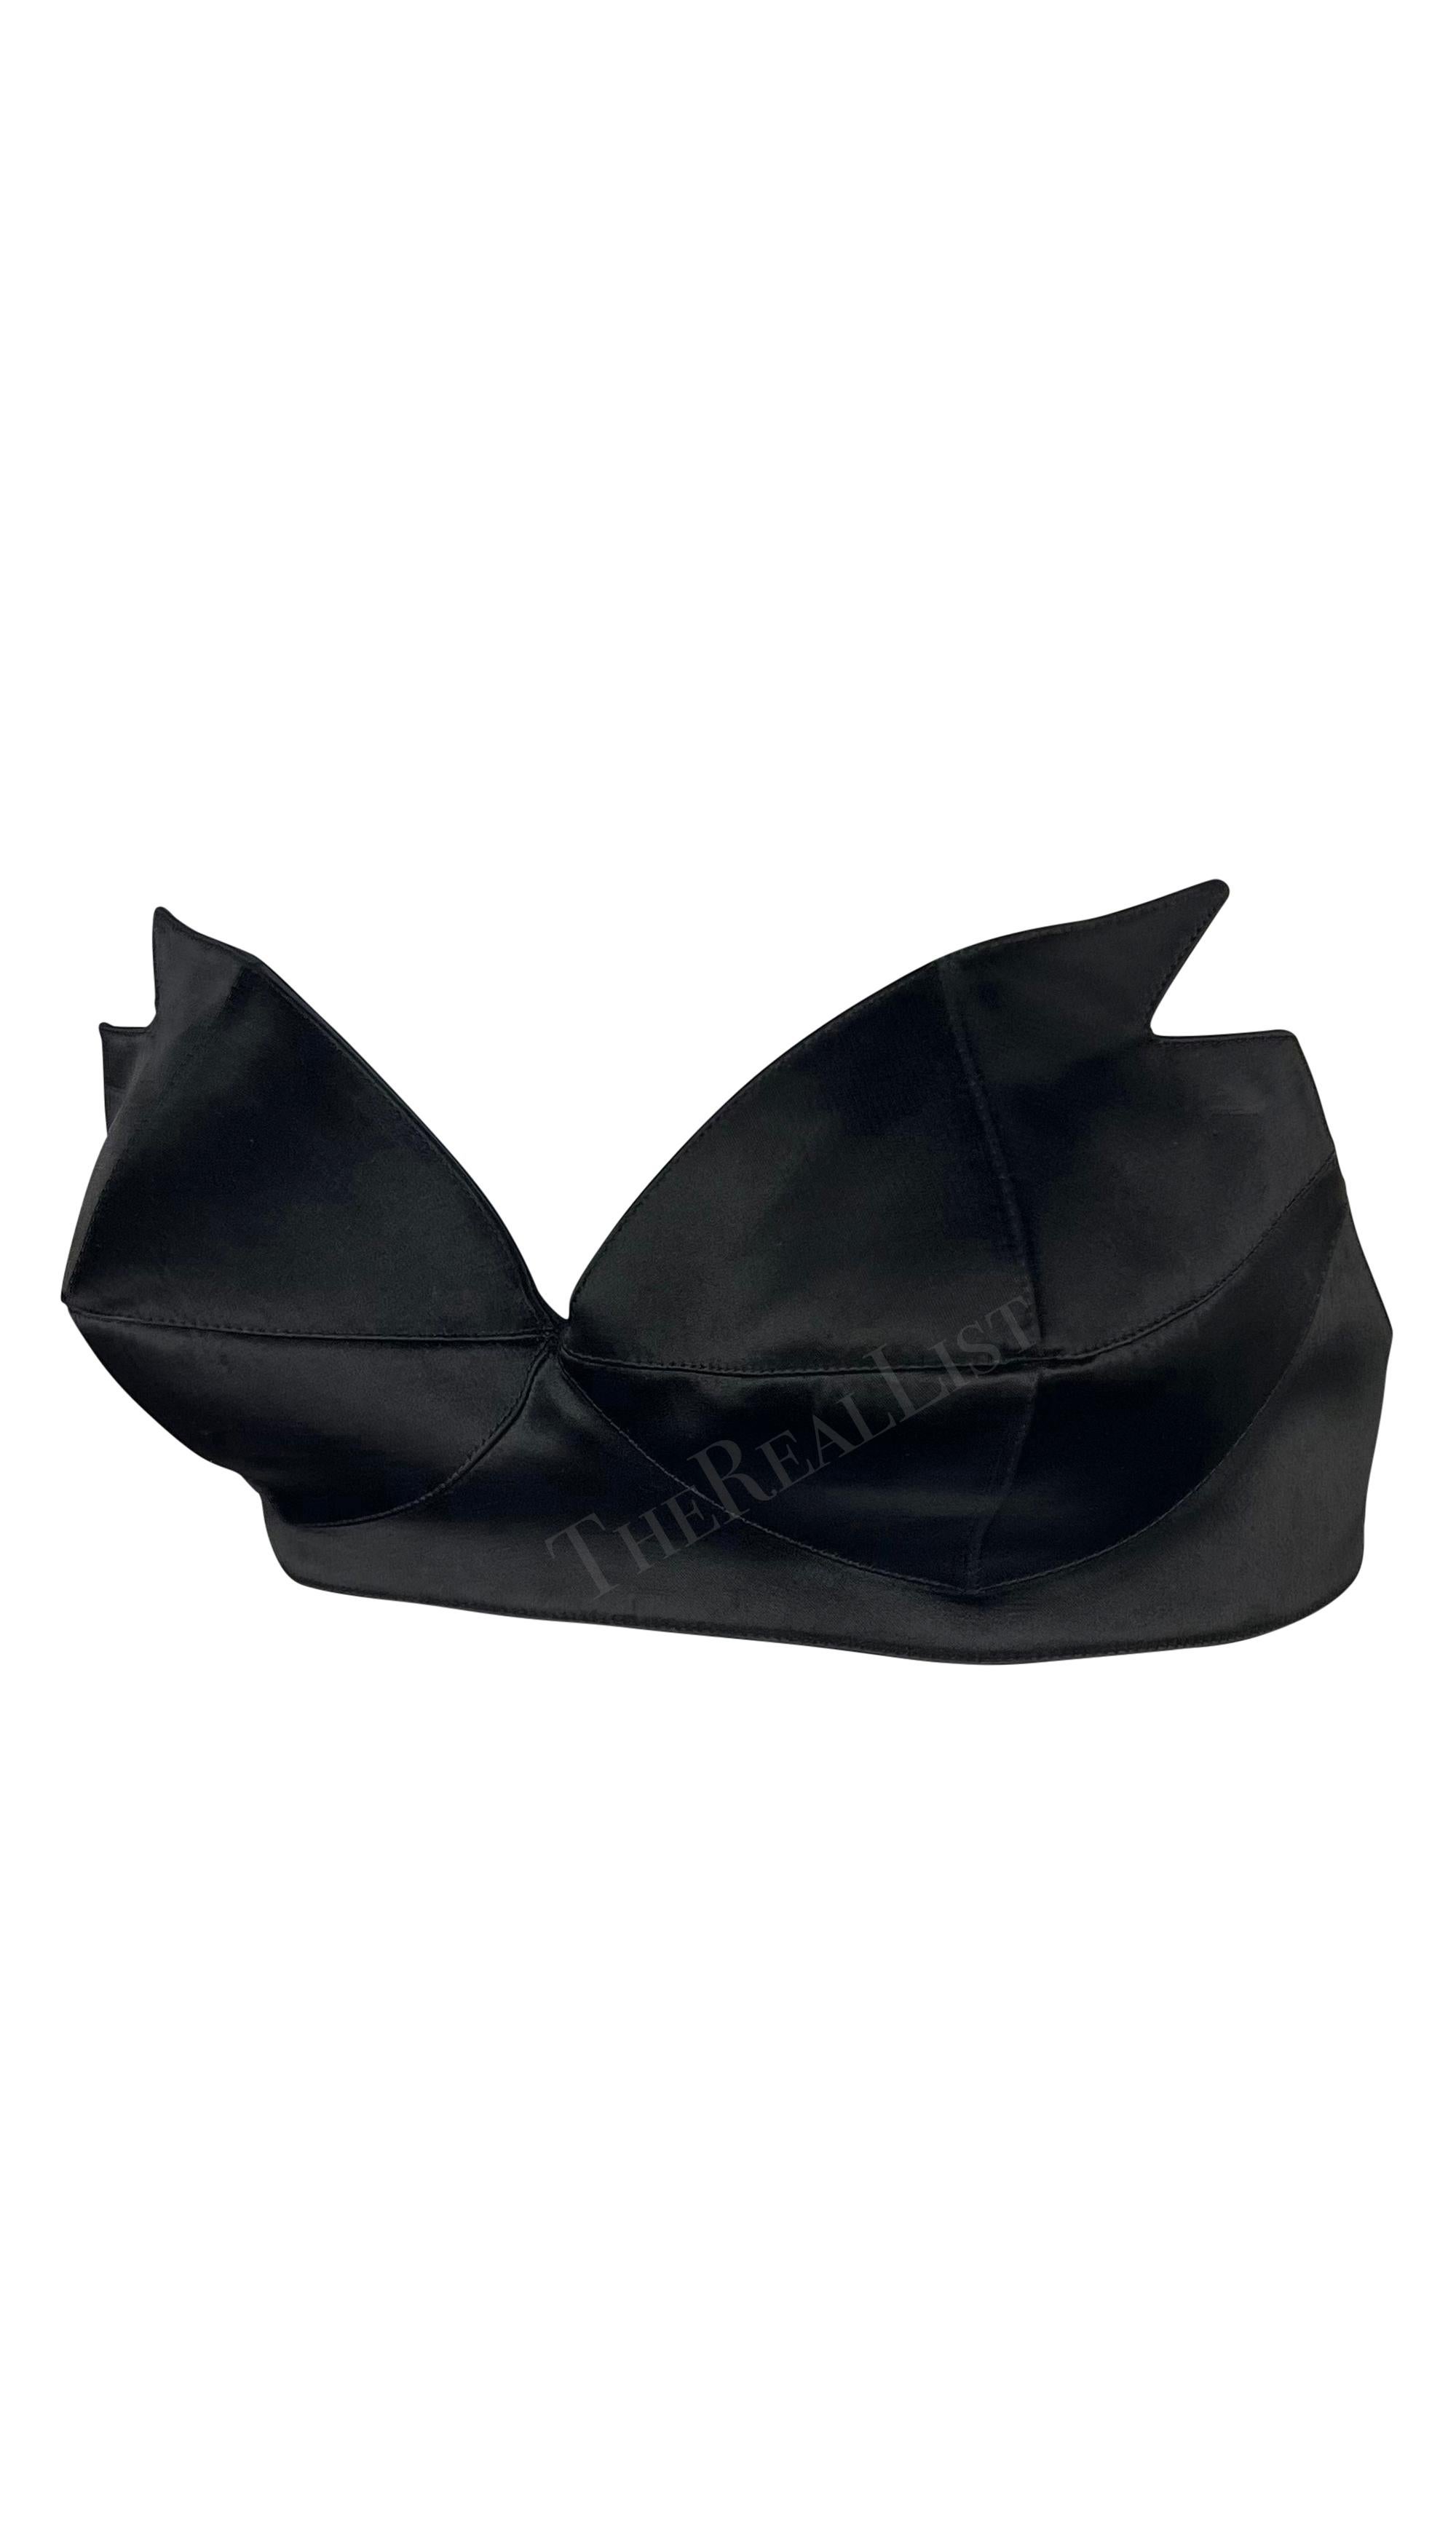 Presenting a stunning black satin Thierry Mugler pointed bralette, designed by Manfred Mugler. From the 1980s, this bralette is constructed entirely of shiny black satin. The bralette features a sweetheart cut and is made complete with pointed